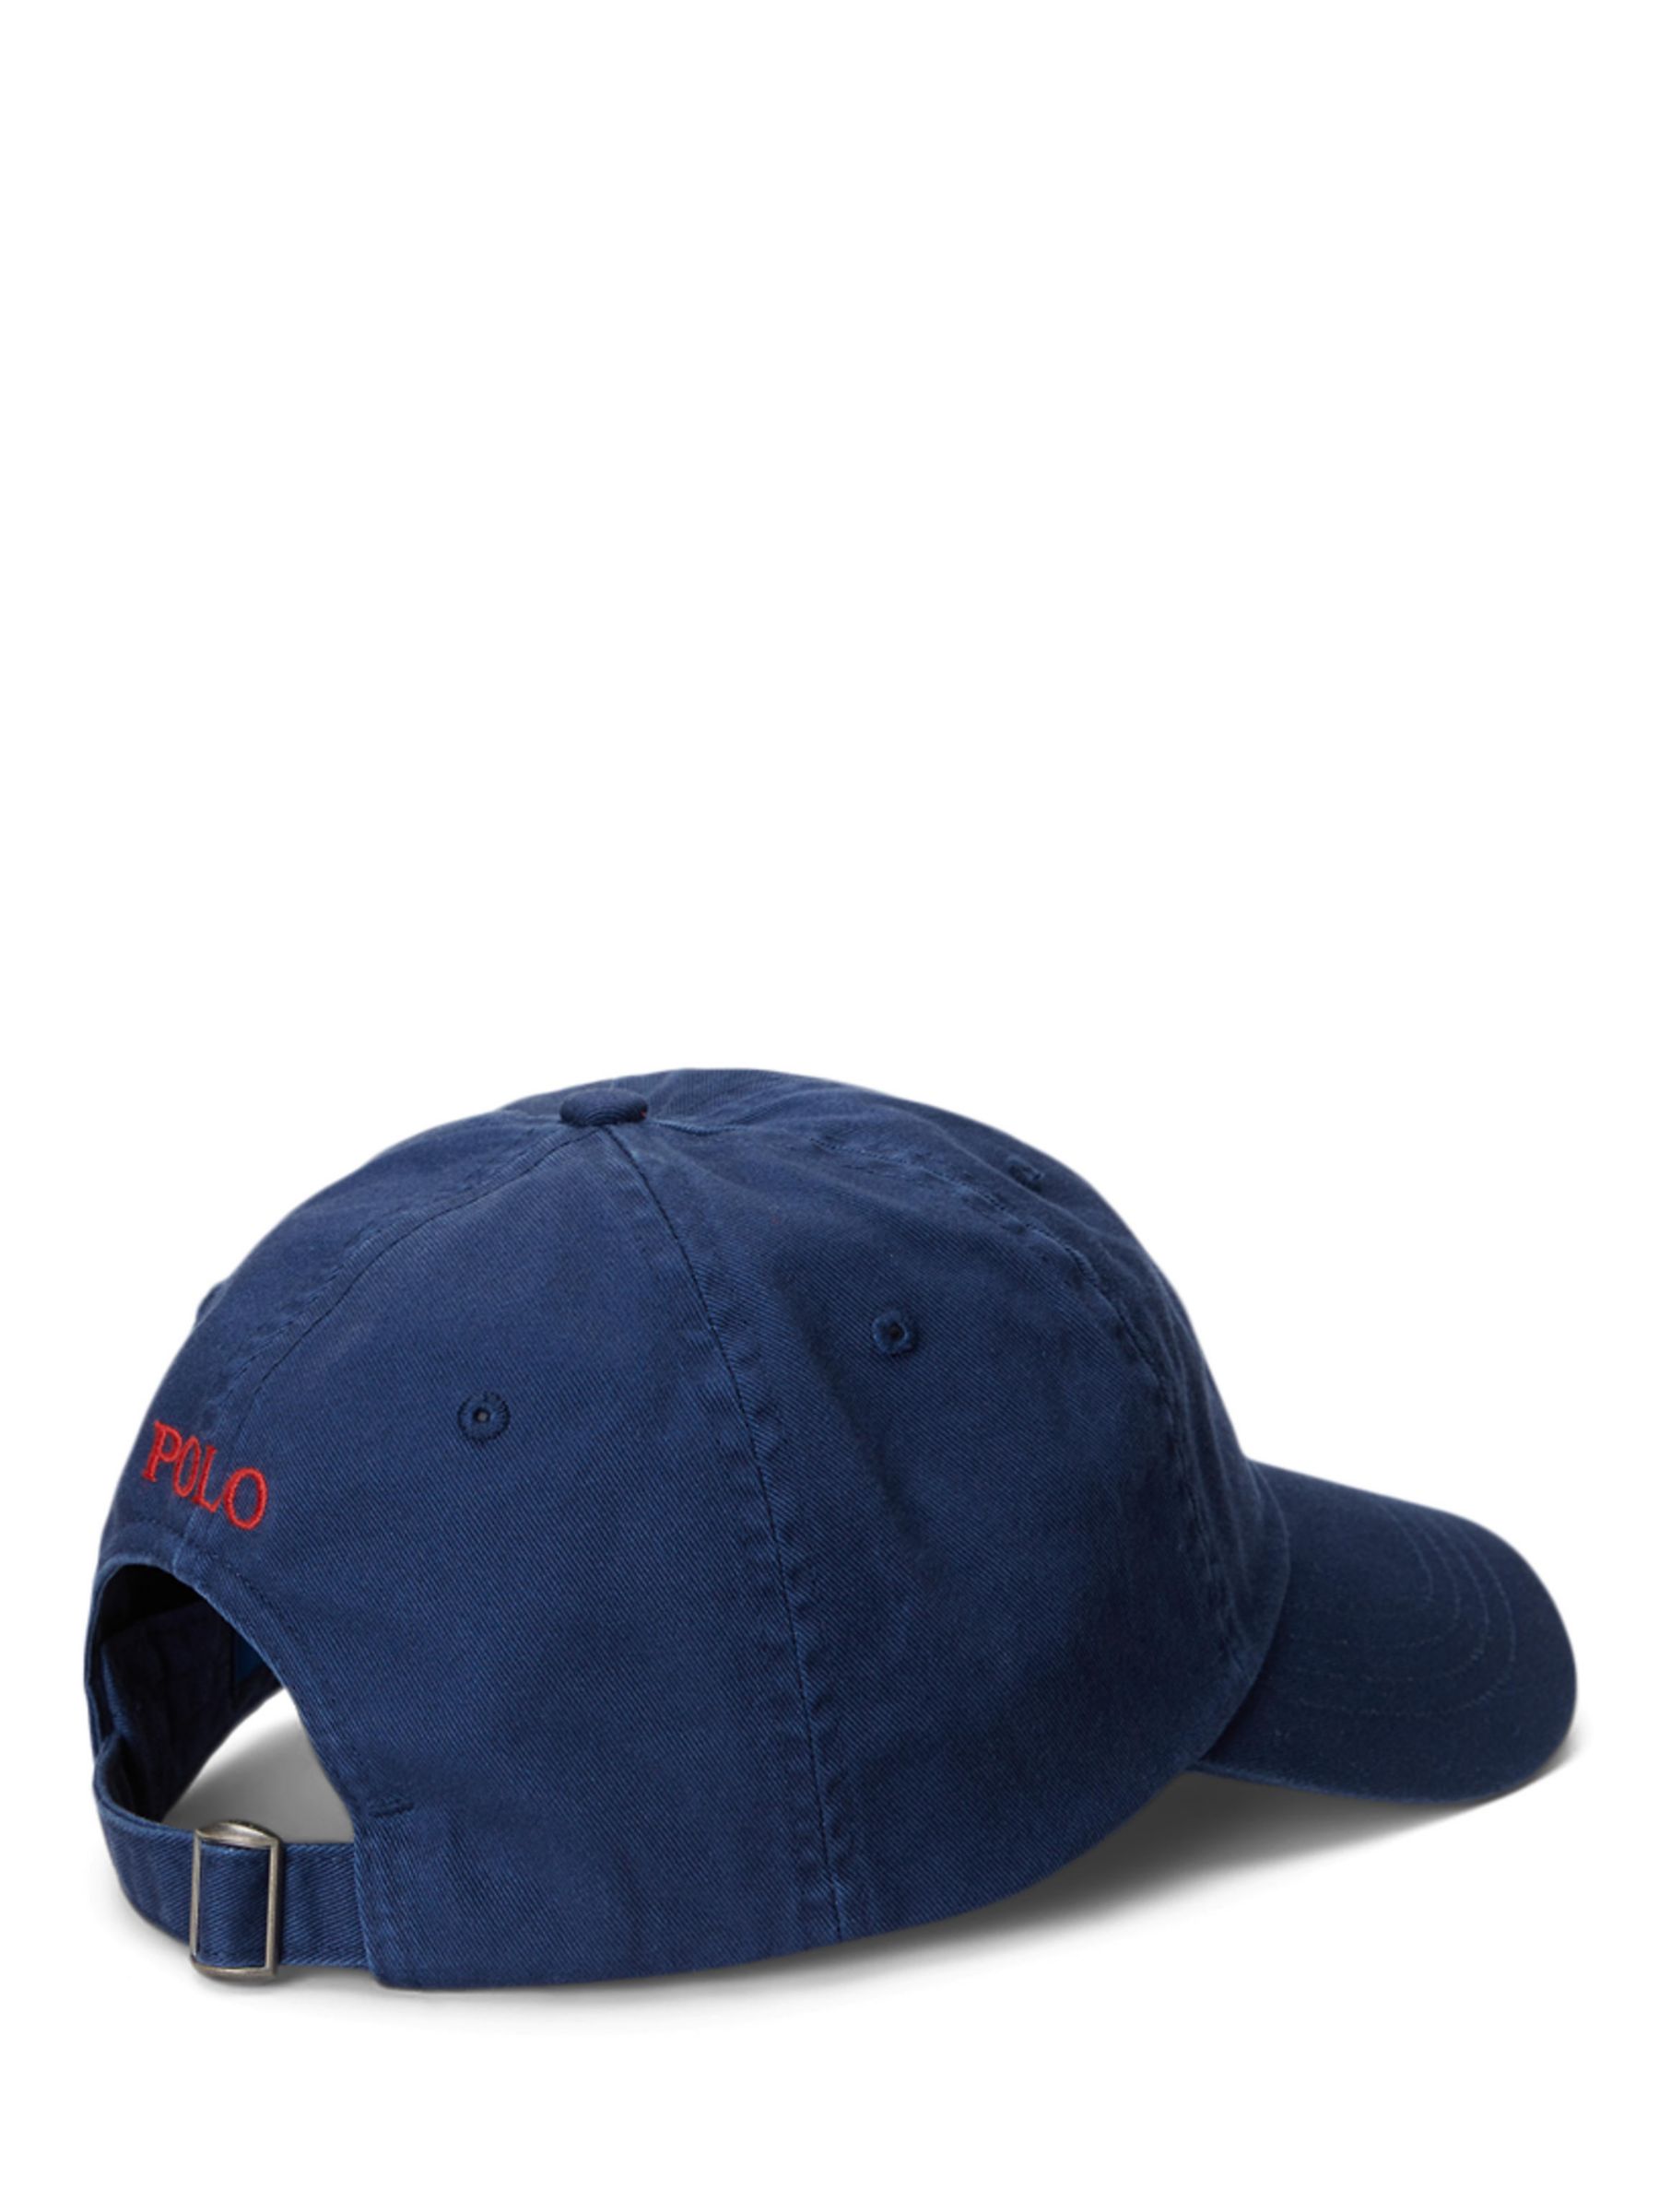 Polo Ralph Lauren Signature Pony Baseball Cap, One Size, Navy/Red at John  Lewis & Partners